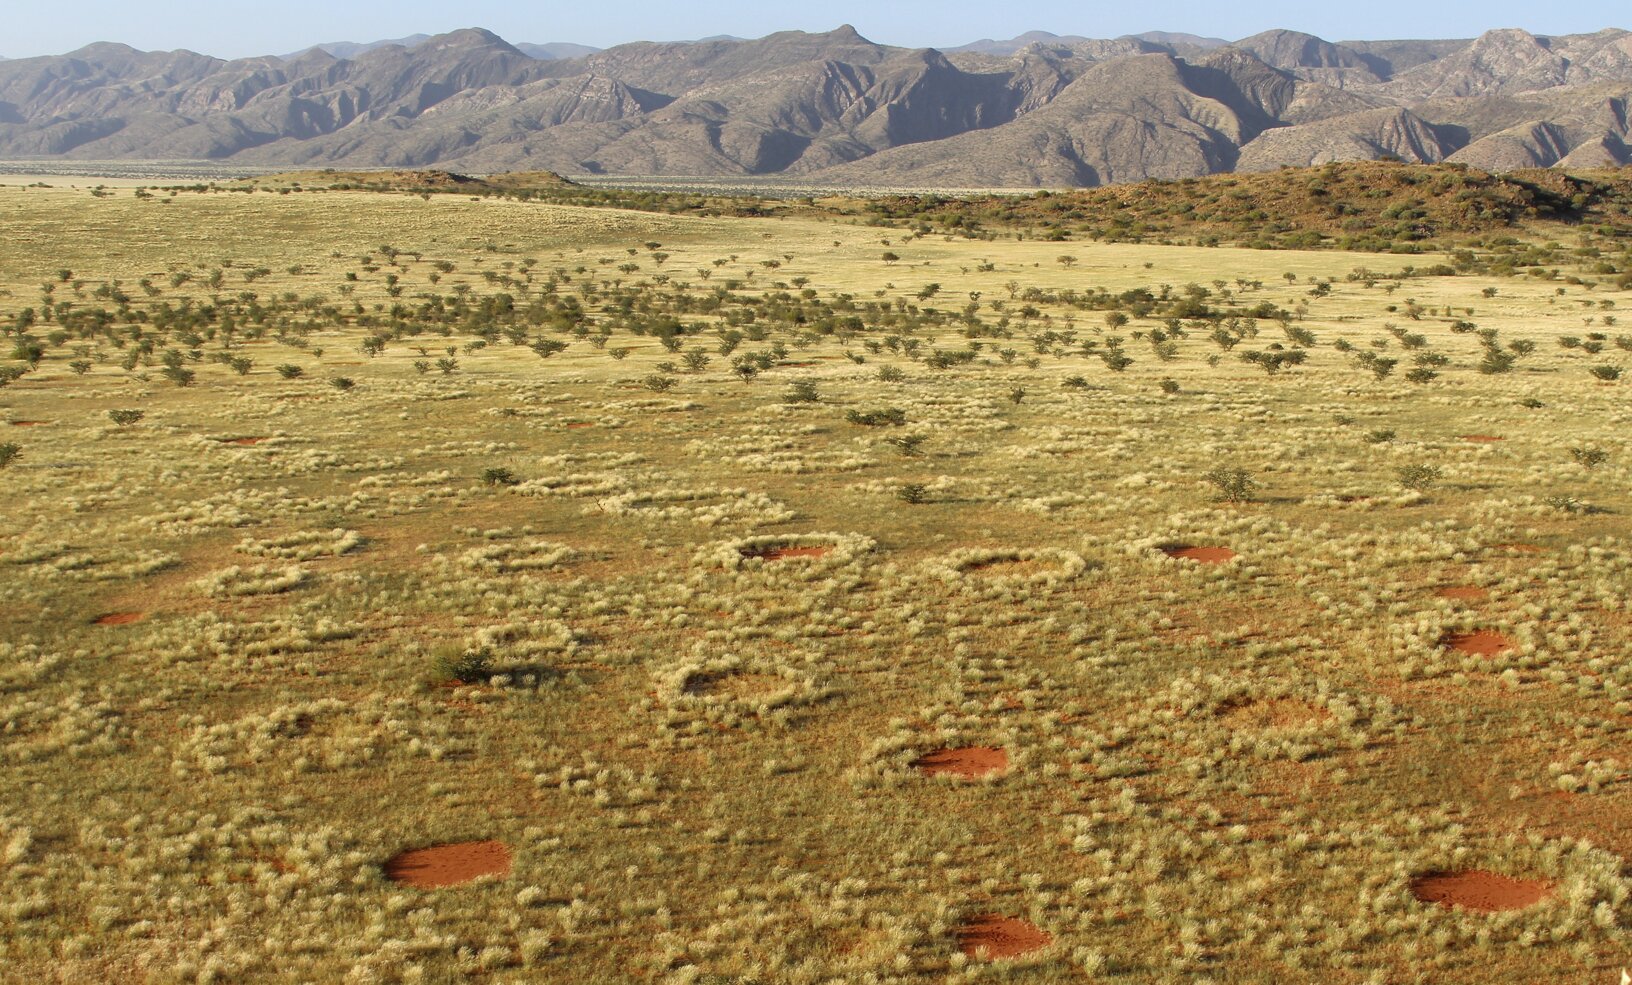 Termites as cause of fairy circles in Namib Desert confirmed